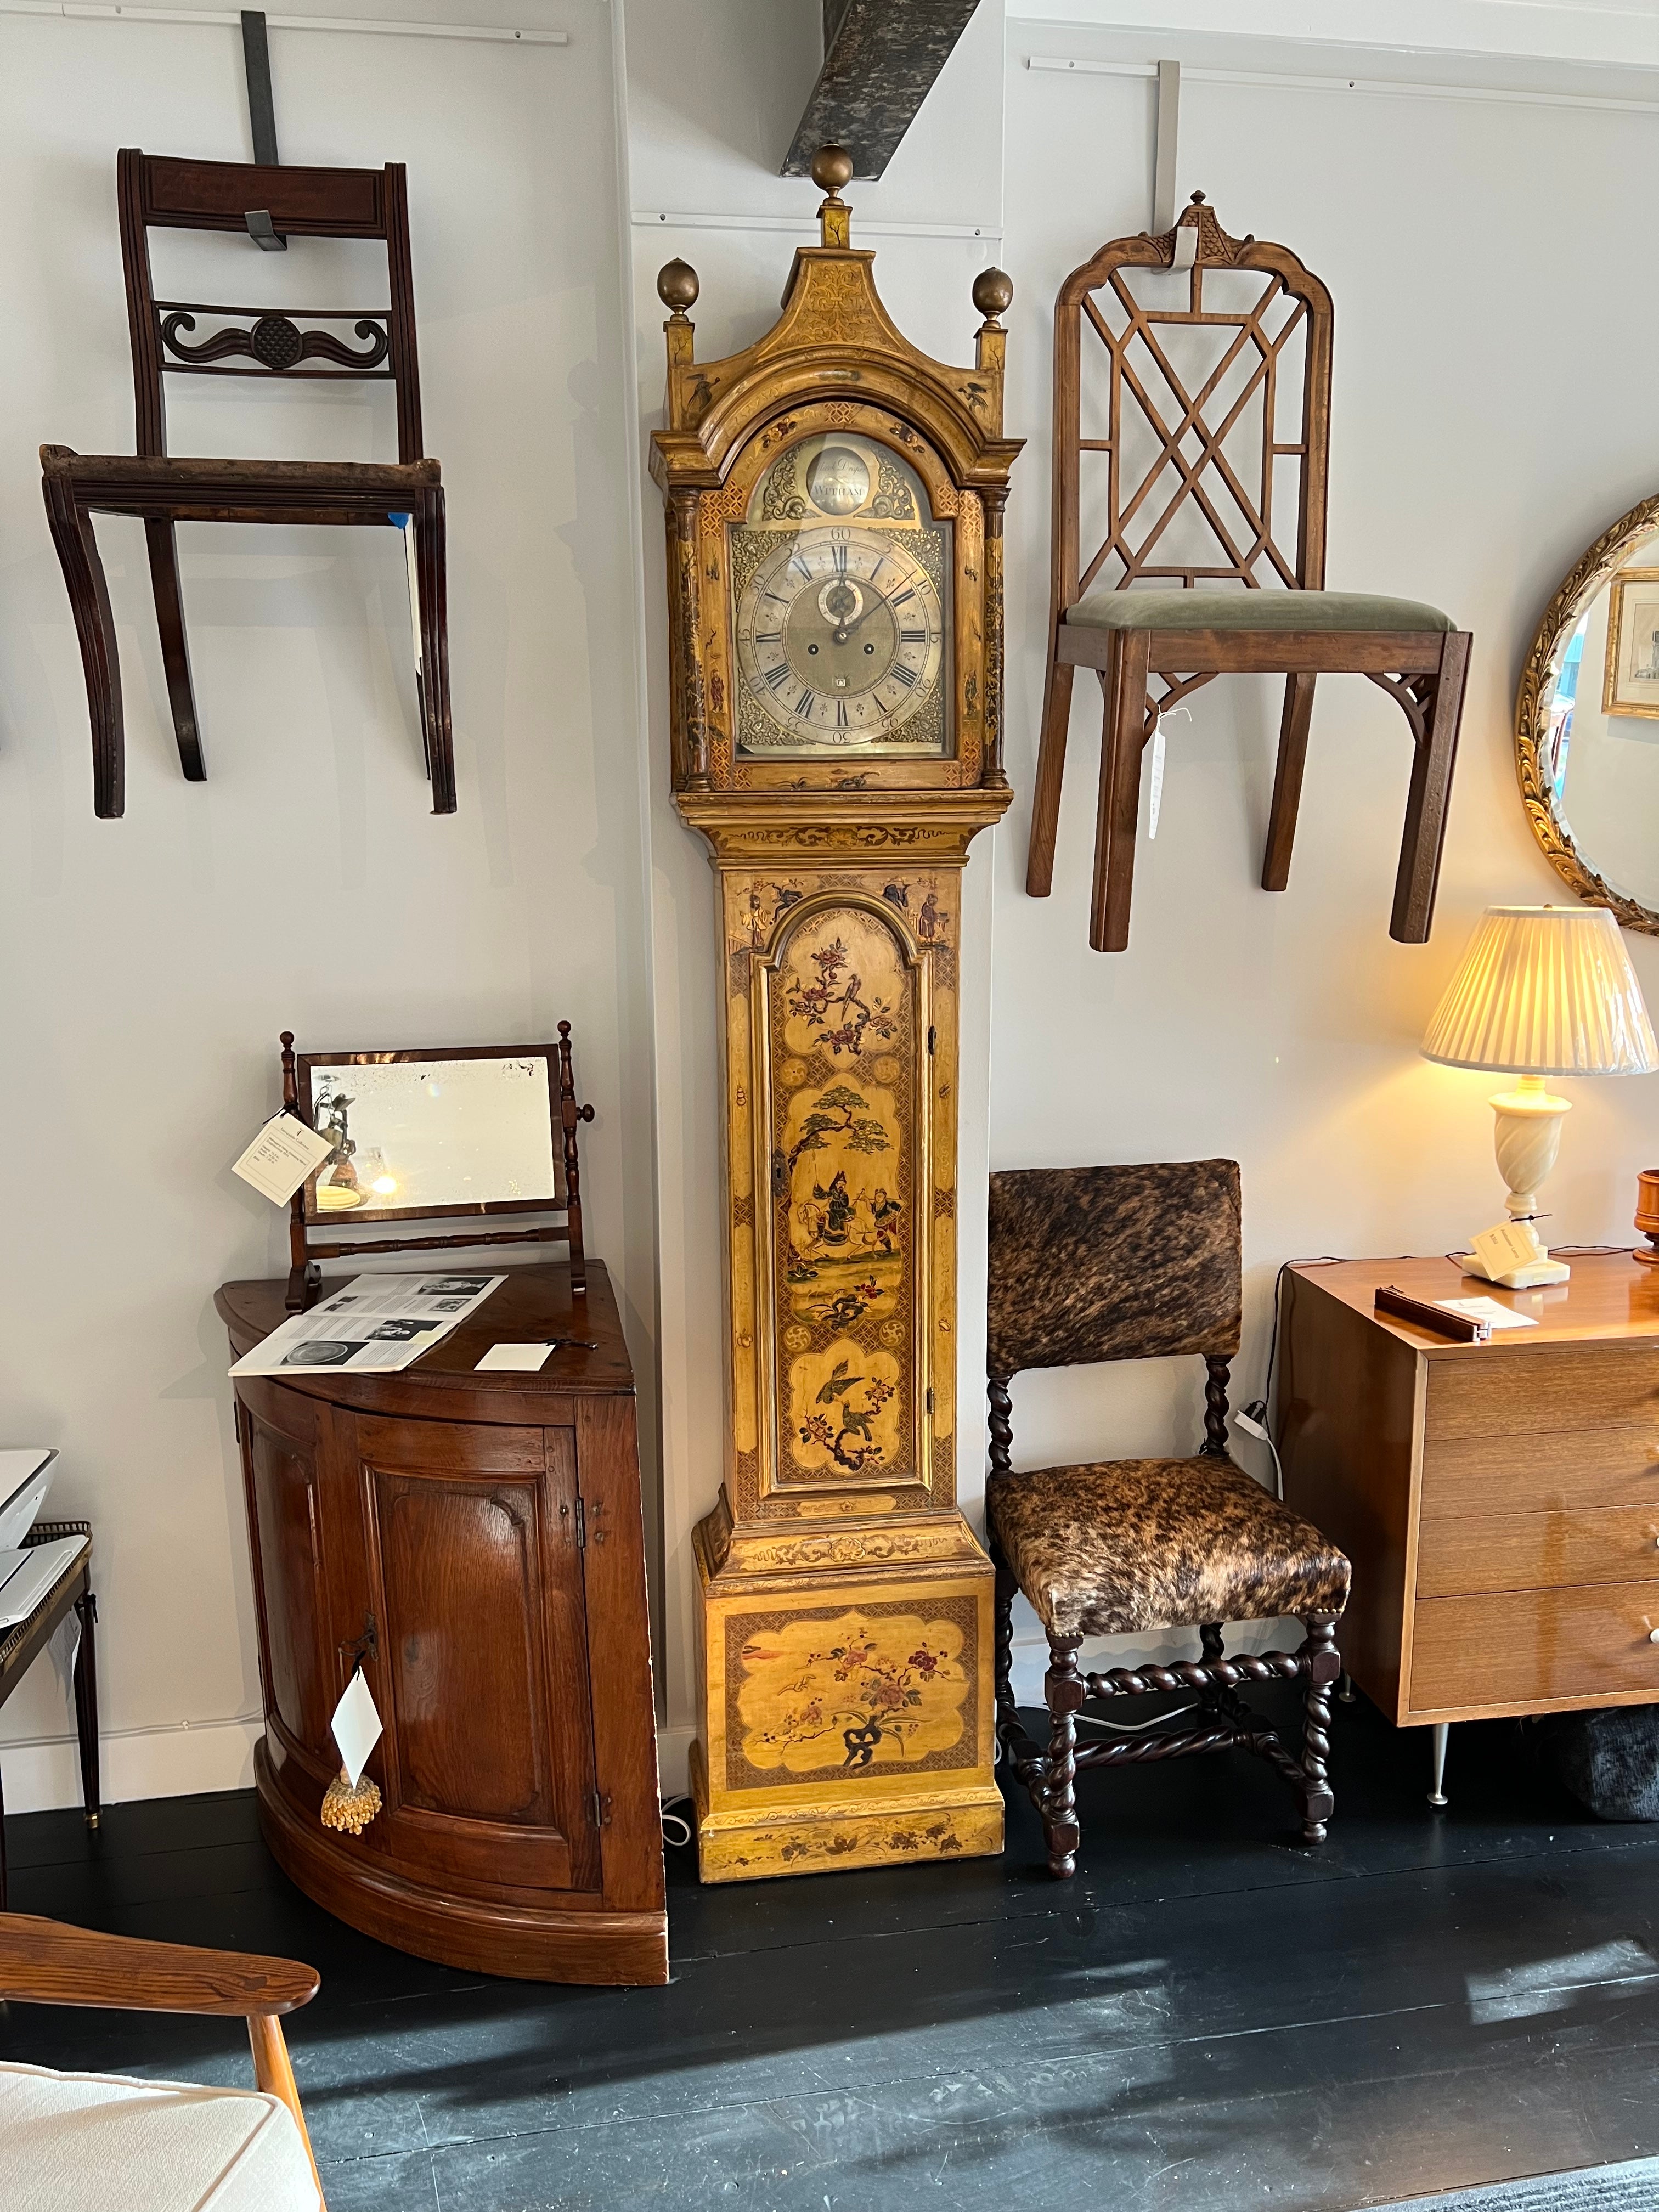 George II Japan painted tall case clock
This Yellow chinoiserie japan painted tall case clock with
It’s origanal 8 day movement with date & second hand 
With 3 ball finials. The movement has been restored & its 
Case was touched up. Ready to be